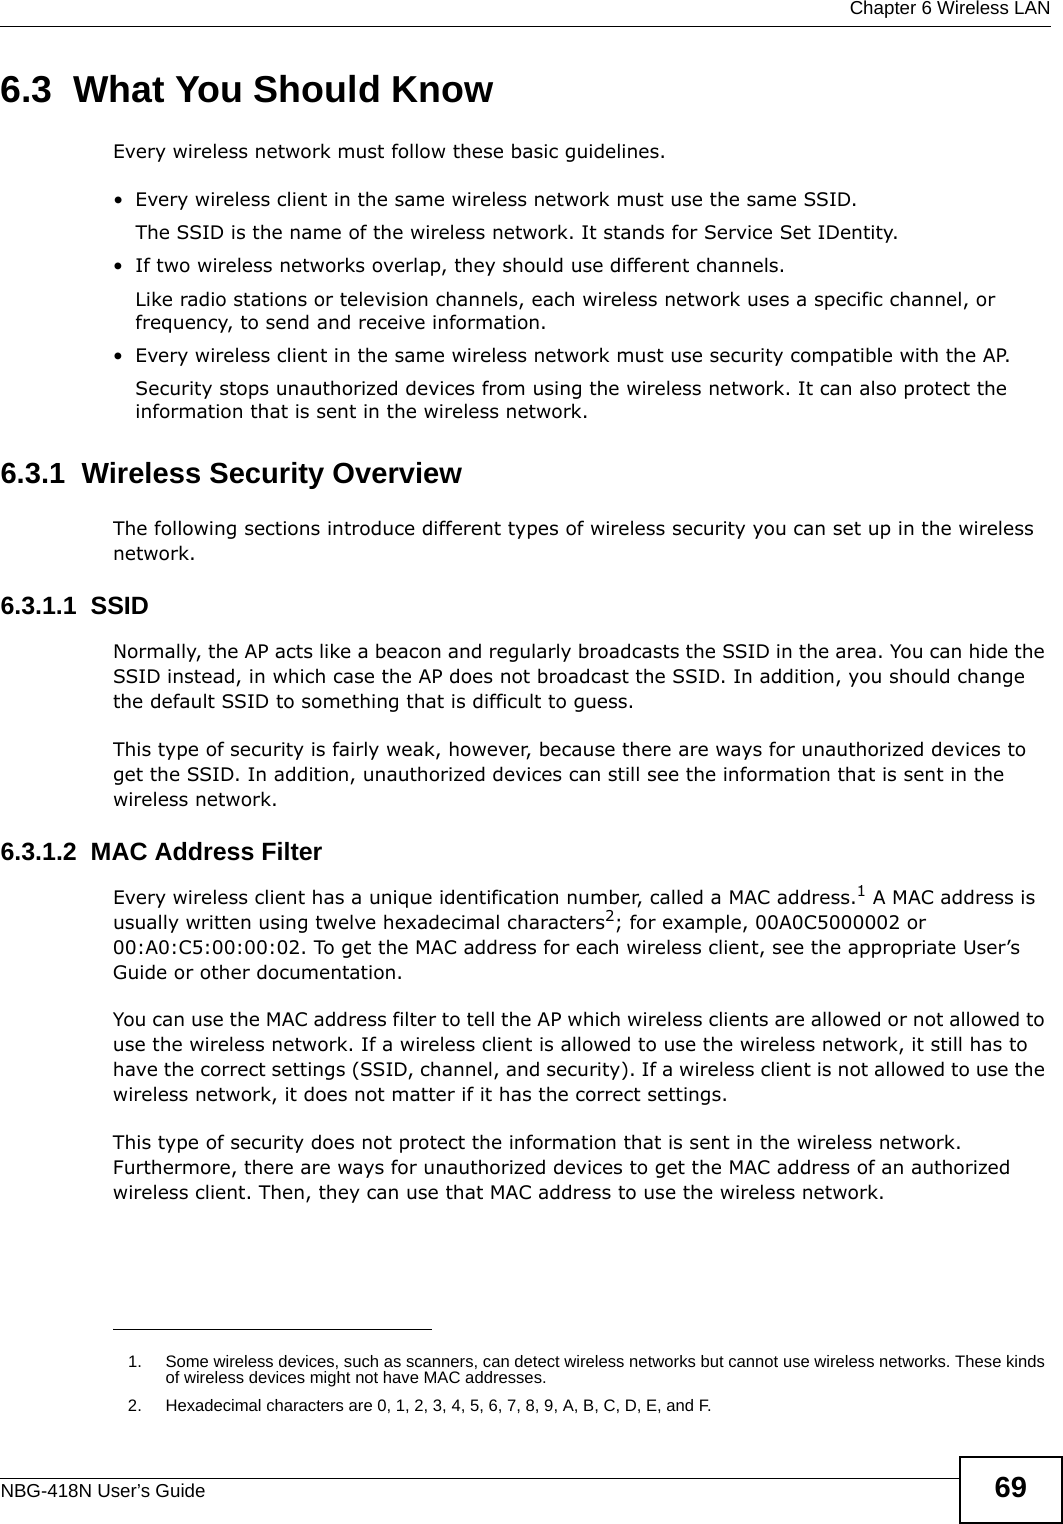  Chapter 6 Wireless LANNBG-418N User’s Guide 696.3  What You Should KnowEvery wireless network must follow these basic guidelines.• Every wireless client in the same wireless network must use the same SSID.The SSID is the name of the wireless network. It stands for Service Set IDentity.• If two wireless networks overlap, they should use different channels.Like radio stations or television channels, each wireless network uses a specific channel, or frequency, to send and receive information.• Every wireless client in the same wireless network must use security compatible with the AP.Security stops unauthorized devices from using the wireless network. It can also protect the information that is sent in the wireless network.6.3.1  Wireless Security OverviewThe following sections introduce different types of wireless security you can set up in the wireless network.6.3.1.1  SSIDNormally, the AP acts like a beacon and regularly broadcasts the SSID in the area. You can hide the SSID instead, in which case the AP does not broadcast the SSID. In addition, you should change the default SSID to something that is difficult to guess.This type of security is fairly weak, however, because there are ways for unauthorized devices to get the SSID. In addition, unauthorized devices can still see the information that is sent in the wireless network.6.3.1.2  MAC Address FilterEvery wireless client has a unique identification number, called a MAC address.1 A MAC address is usually written using twelve hexadecimal characters2; for example, 00A0C5000002 or 00:A0:C5:00:00:02. To get the MAC address for each wireless client, see the appropriate User’s Guide or other documentation.You can use the MAC address filter to tell the AP which wireless clients are allowed or not allowed to use the wireless network. If a wireless client is allowed to use the wireless network, it still has to have the correct settings (SSID, channel, and security). If a wireless client is not allowed to use the wireless network, it does not matter if it has the correct settings.This type of security does not protect the information that is sent in the wireless network. Furthermore, there are ways for unauthorized devices to get the MAC address of an authorized wireless client. Then, they can use that MAC address to use the wireless network.1. Some wireless devices, such as scanners, can detect wireless networks but cannot use wireless networks. These kinds of wireless devices might not have MAC addresses.2. Hexadecimal characters are 0, 1, 2, 3, 4, 5, 6, 7, 8, 9, A, B, C, D, E, and F.